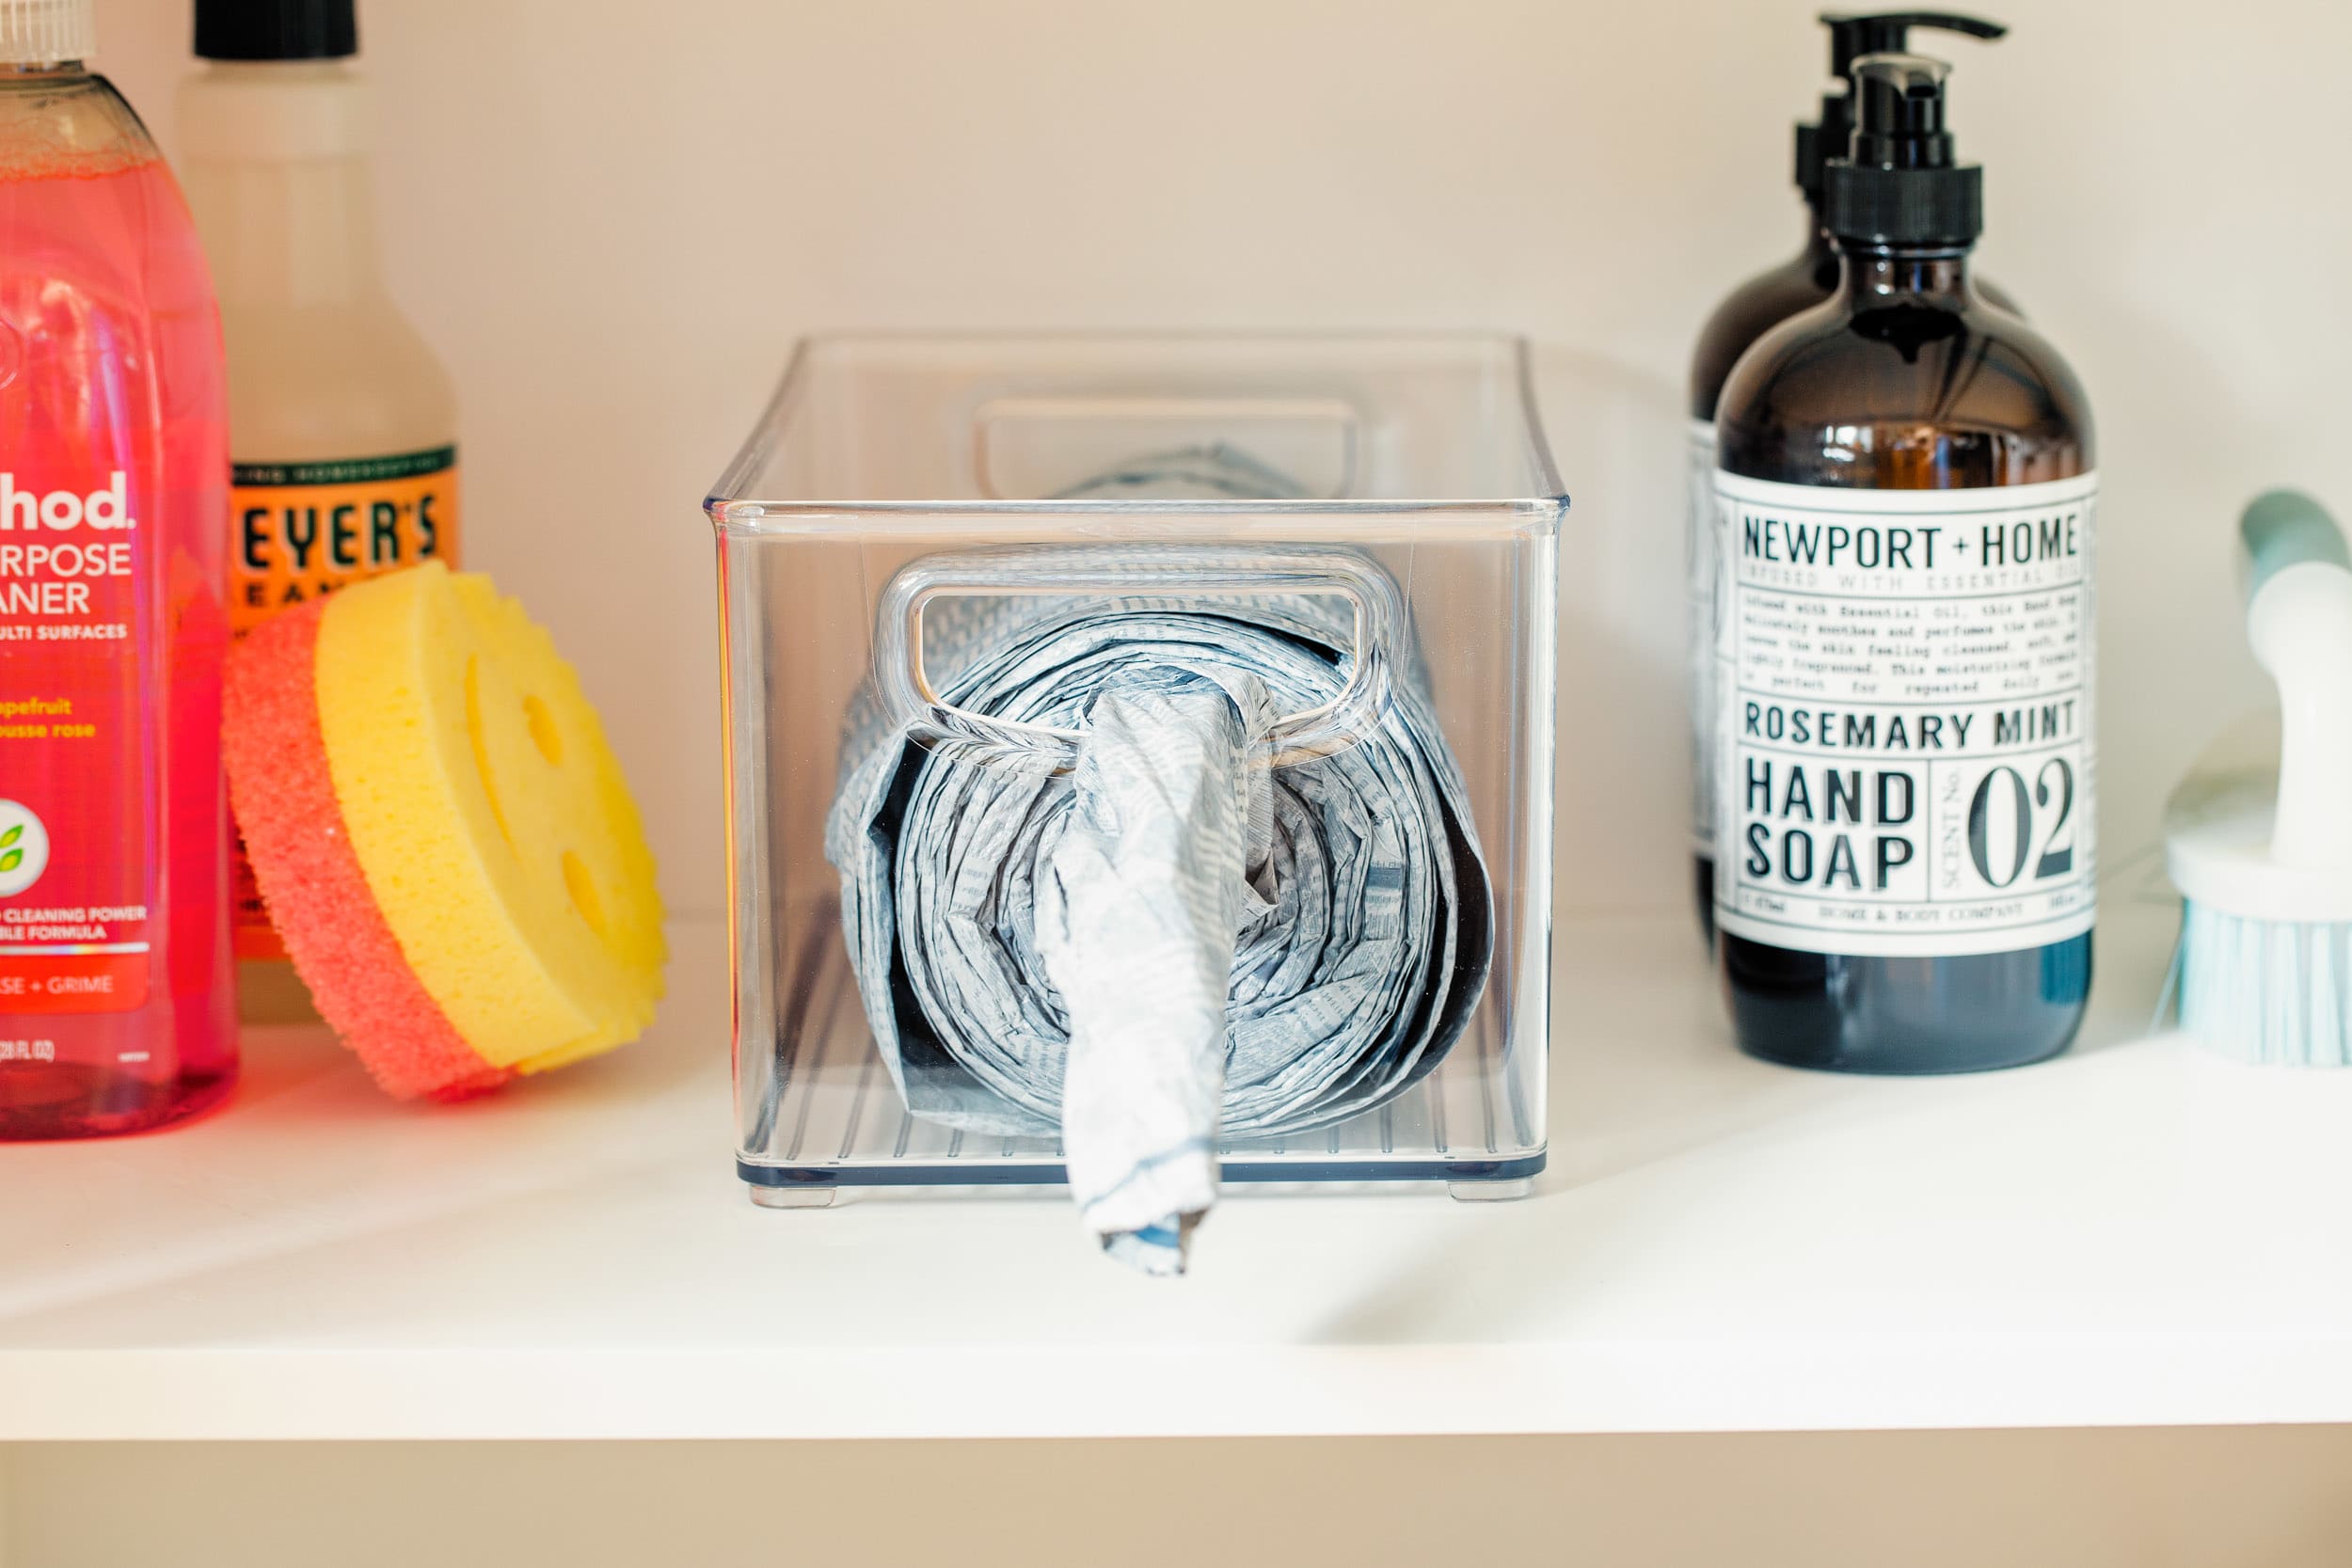 11 Clever Ways to Store Trash Bags That You've Never Thought of